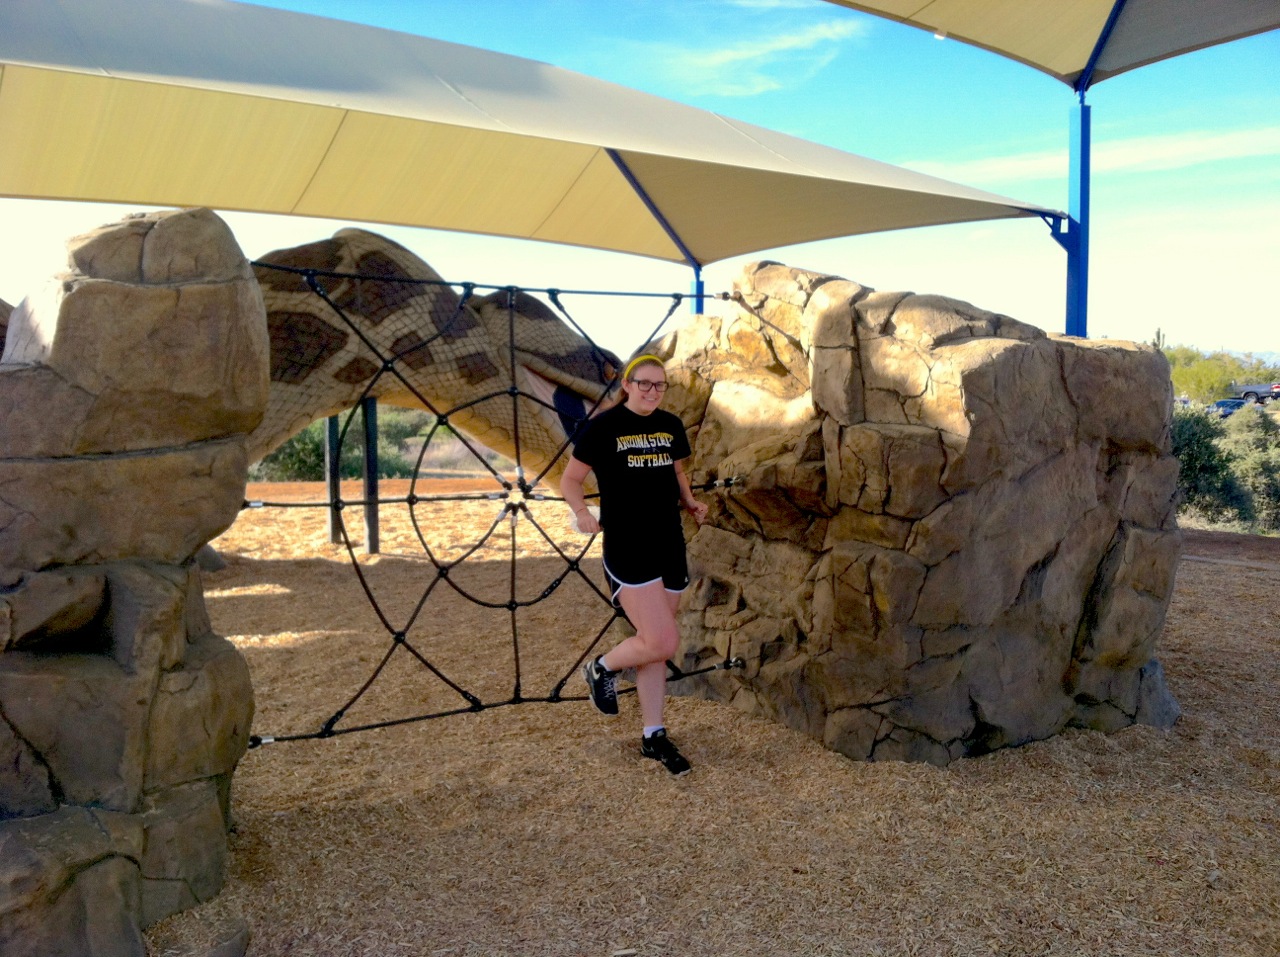 Enormous climbing boulders with a spider web net stretched between them give children a unique way to climb and explore.